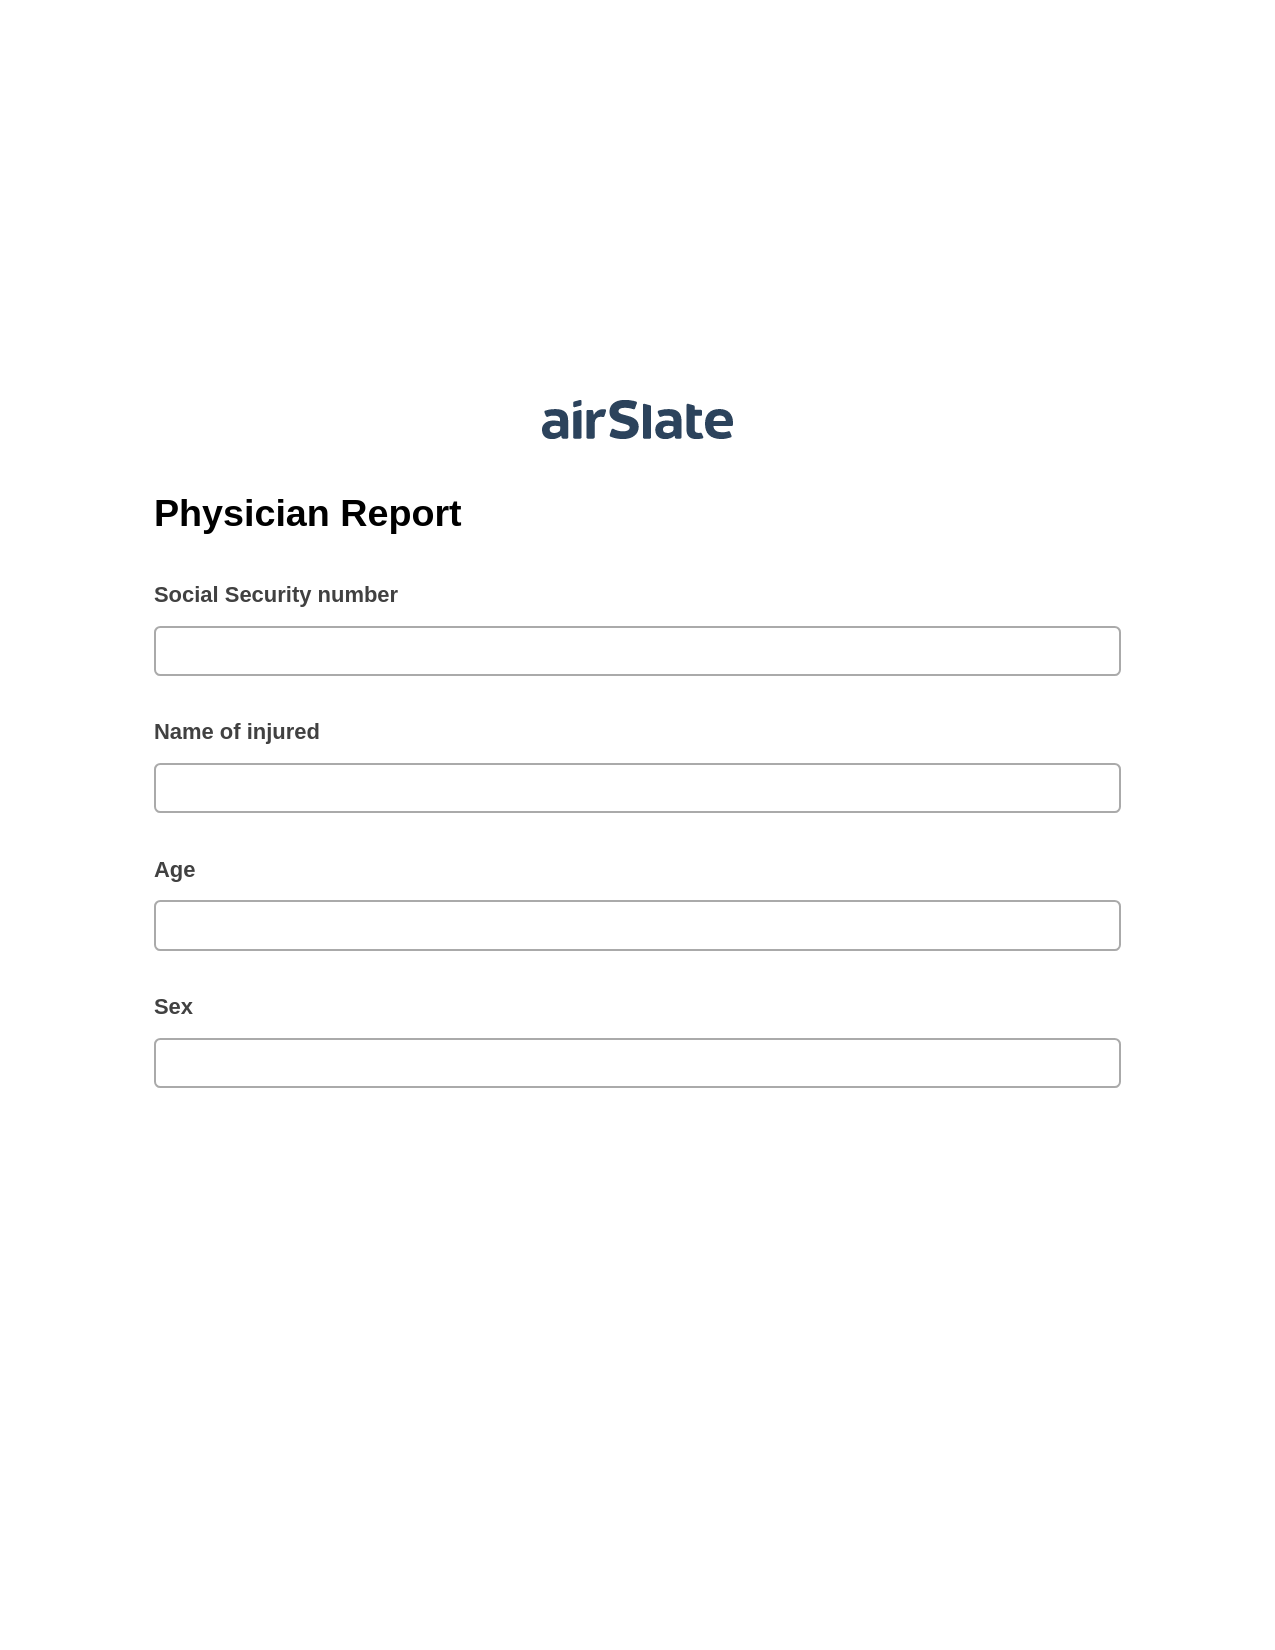 Physician Report Pre-fill from CSV File Bot, Lock the Slate Bot, Post-finish Document Bot